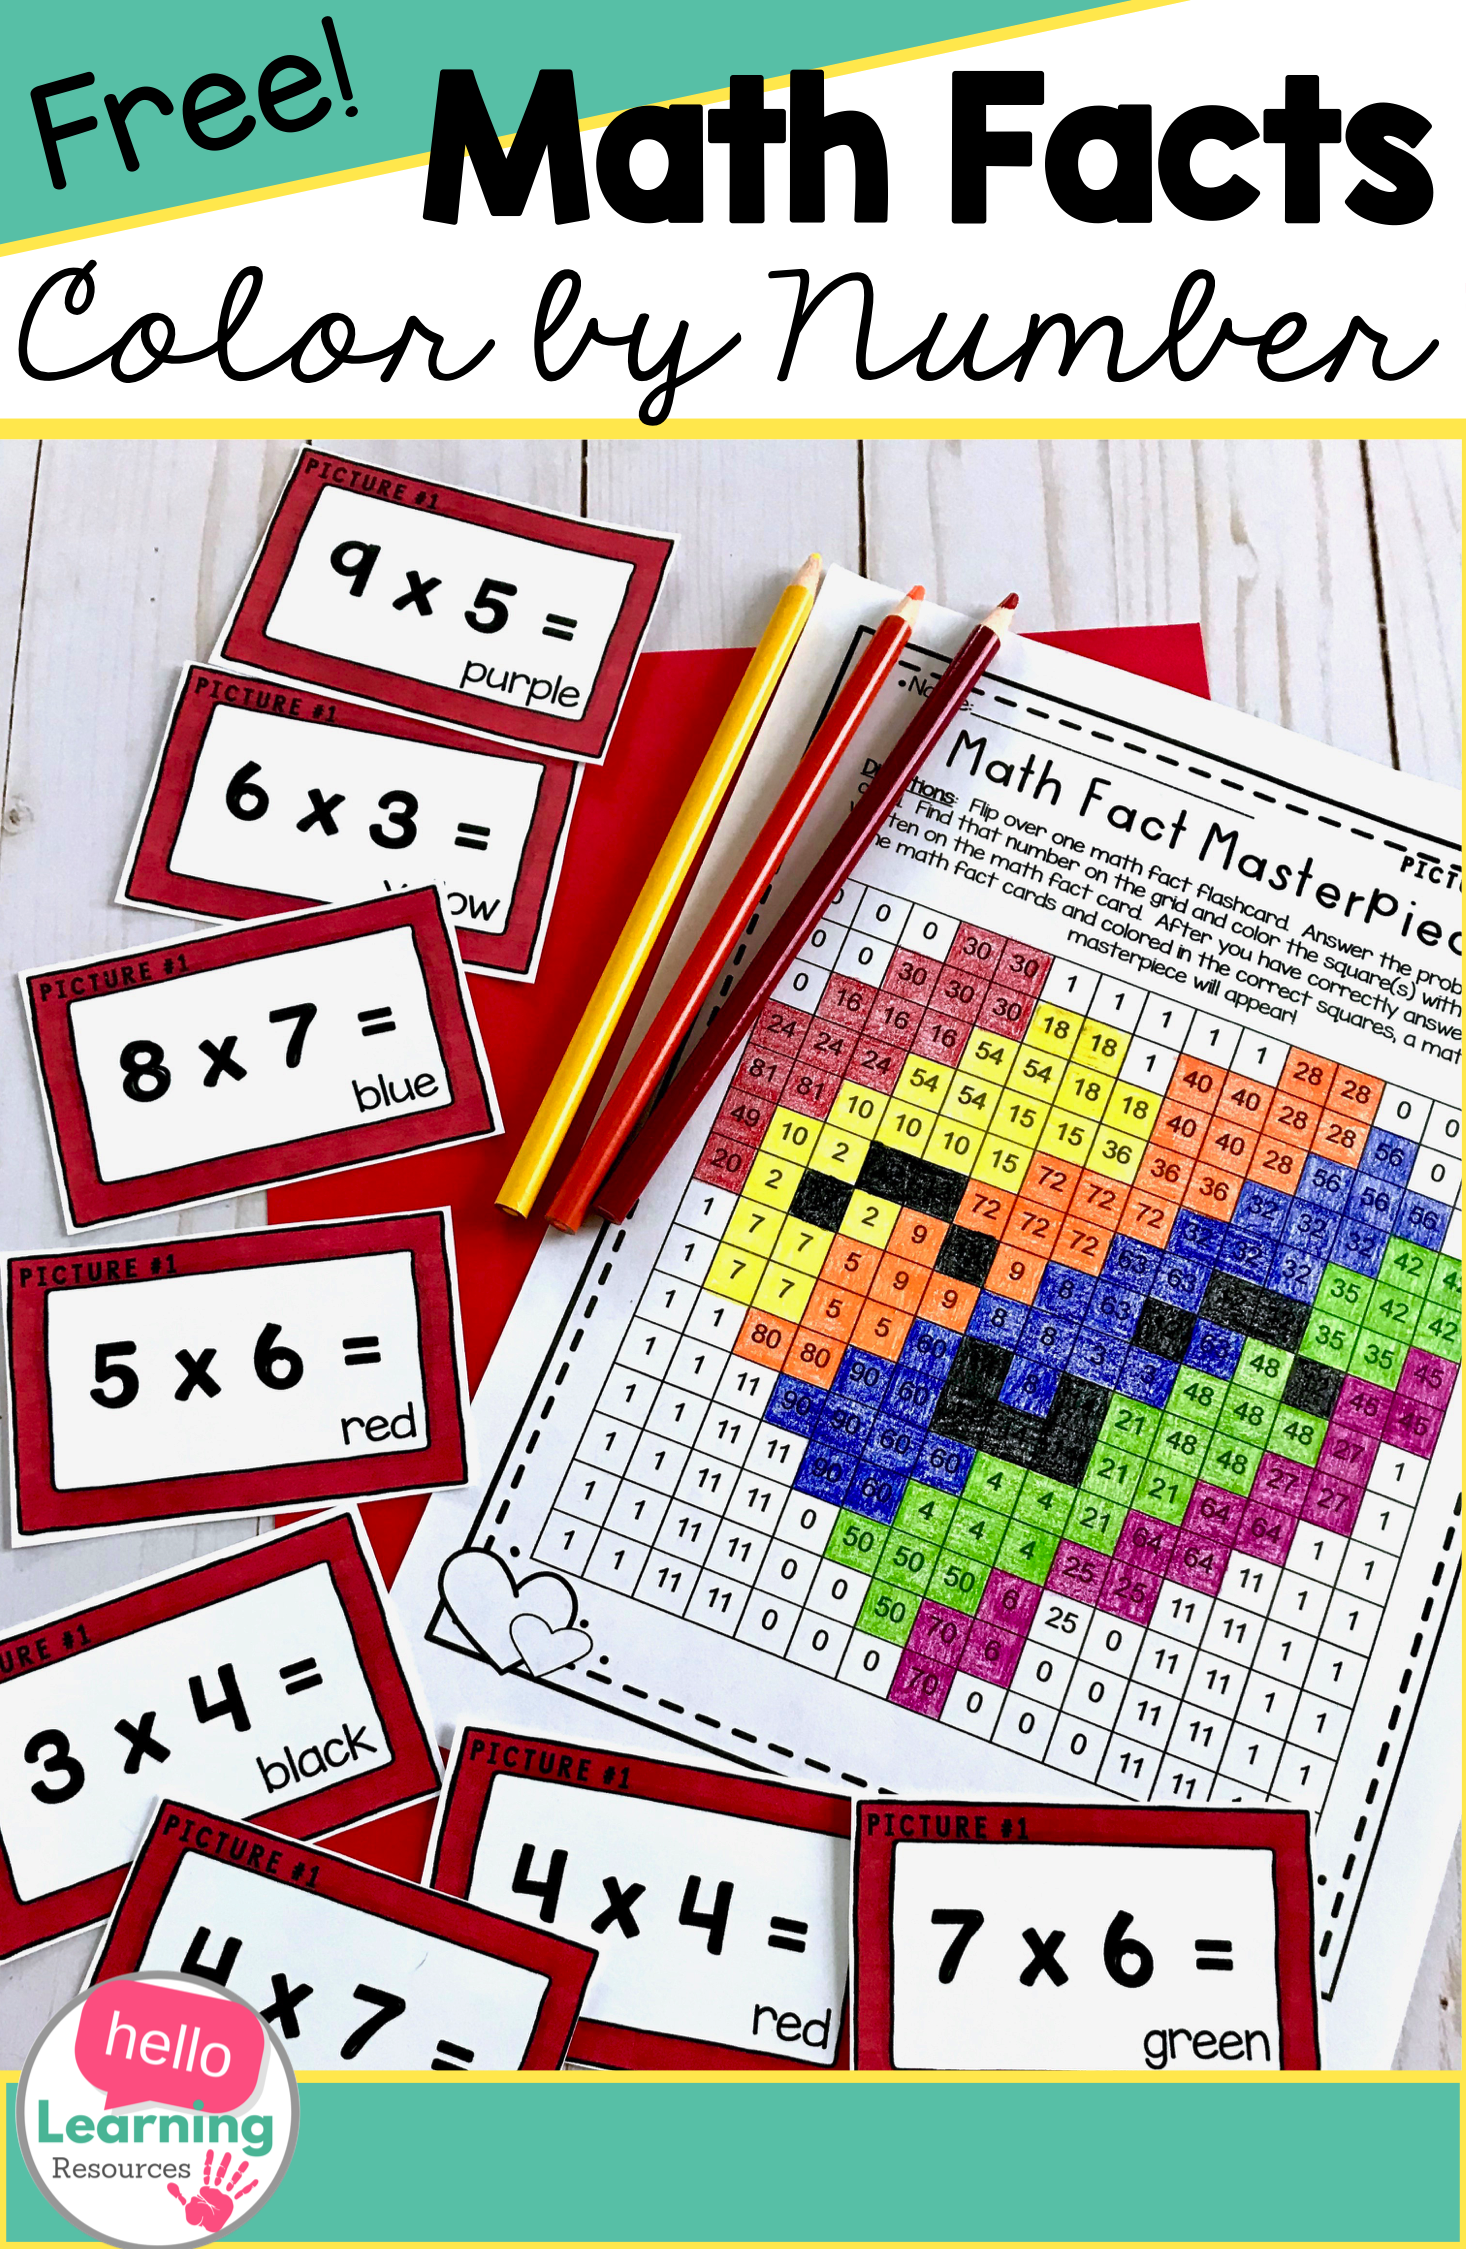 Math Facts Colornumber Multiplication Freebie | Math